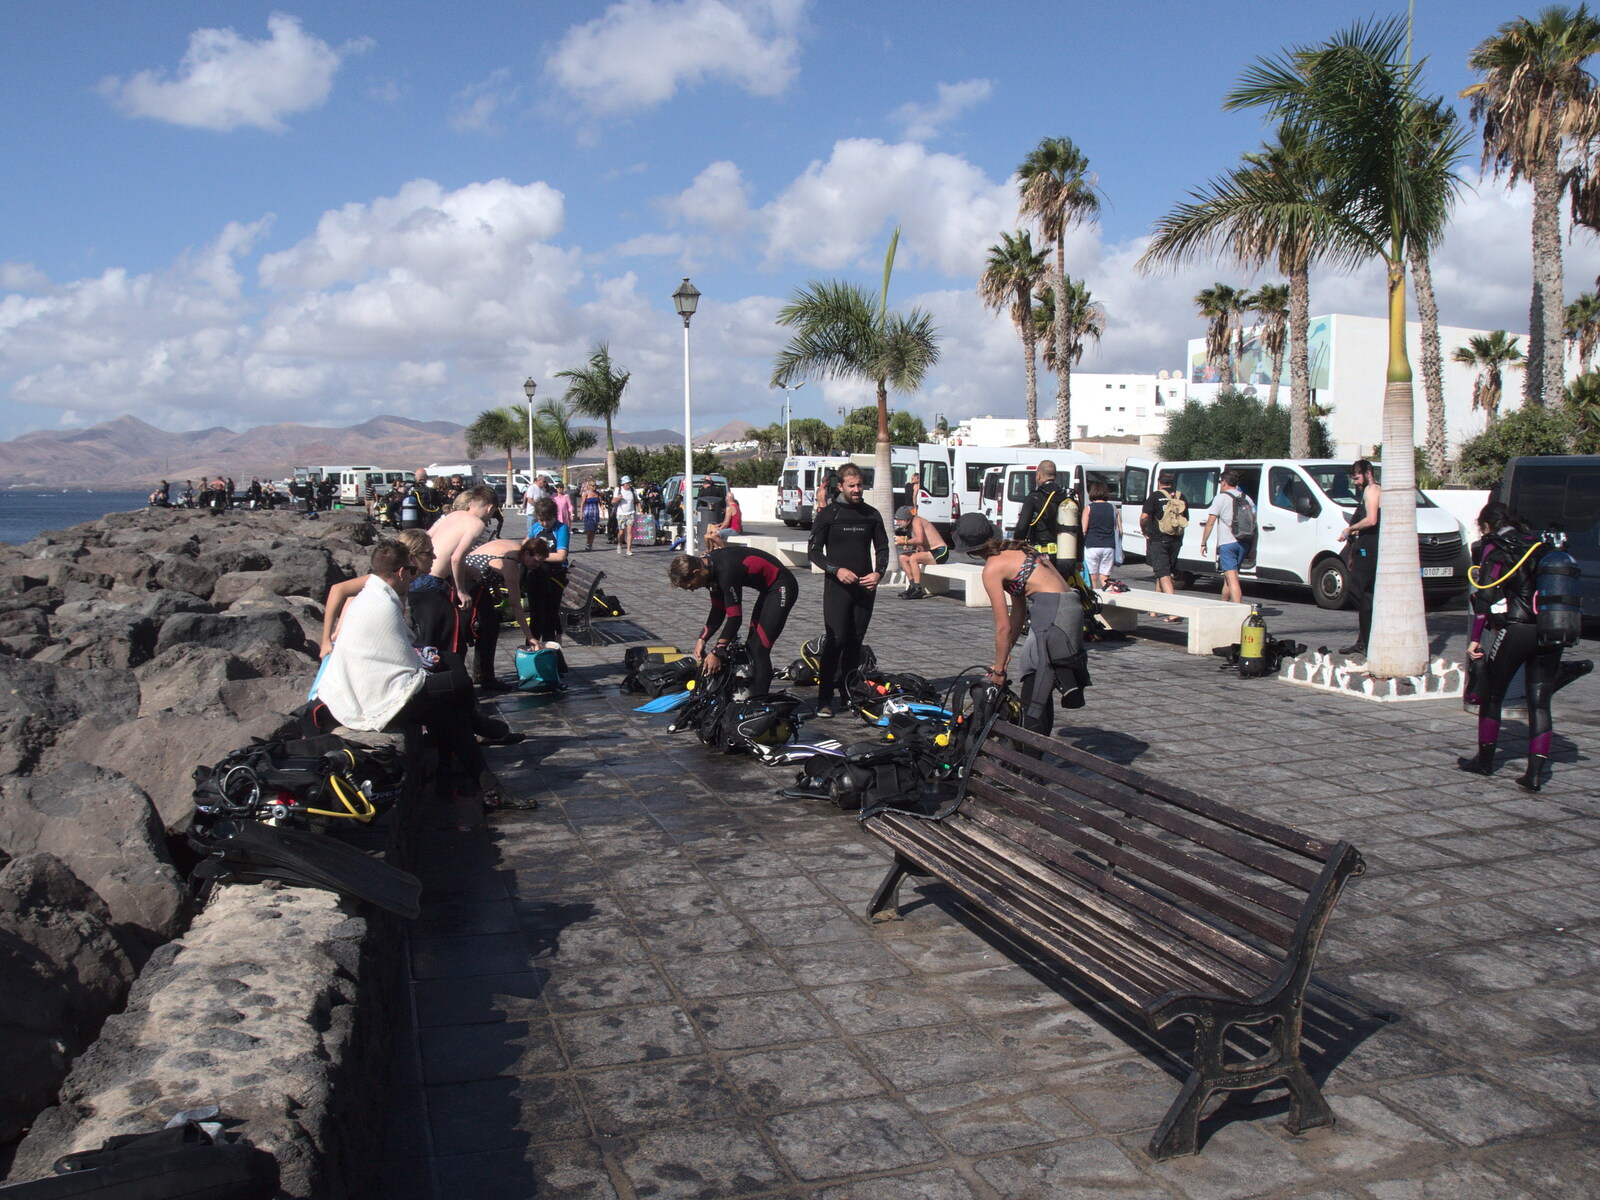 Fred's diving gang get rugged up from The Volcanoes of Lanzarote, Canary Islands, Spain - 27th October 2021